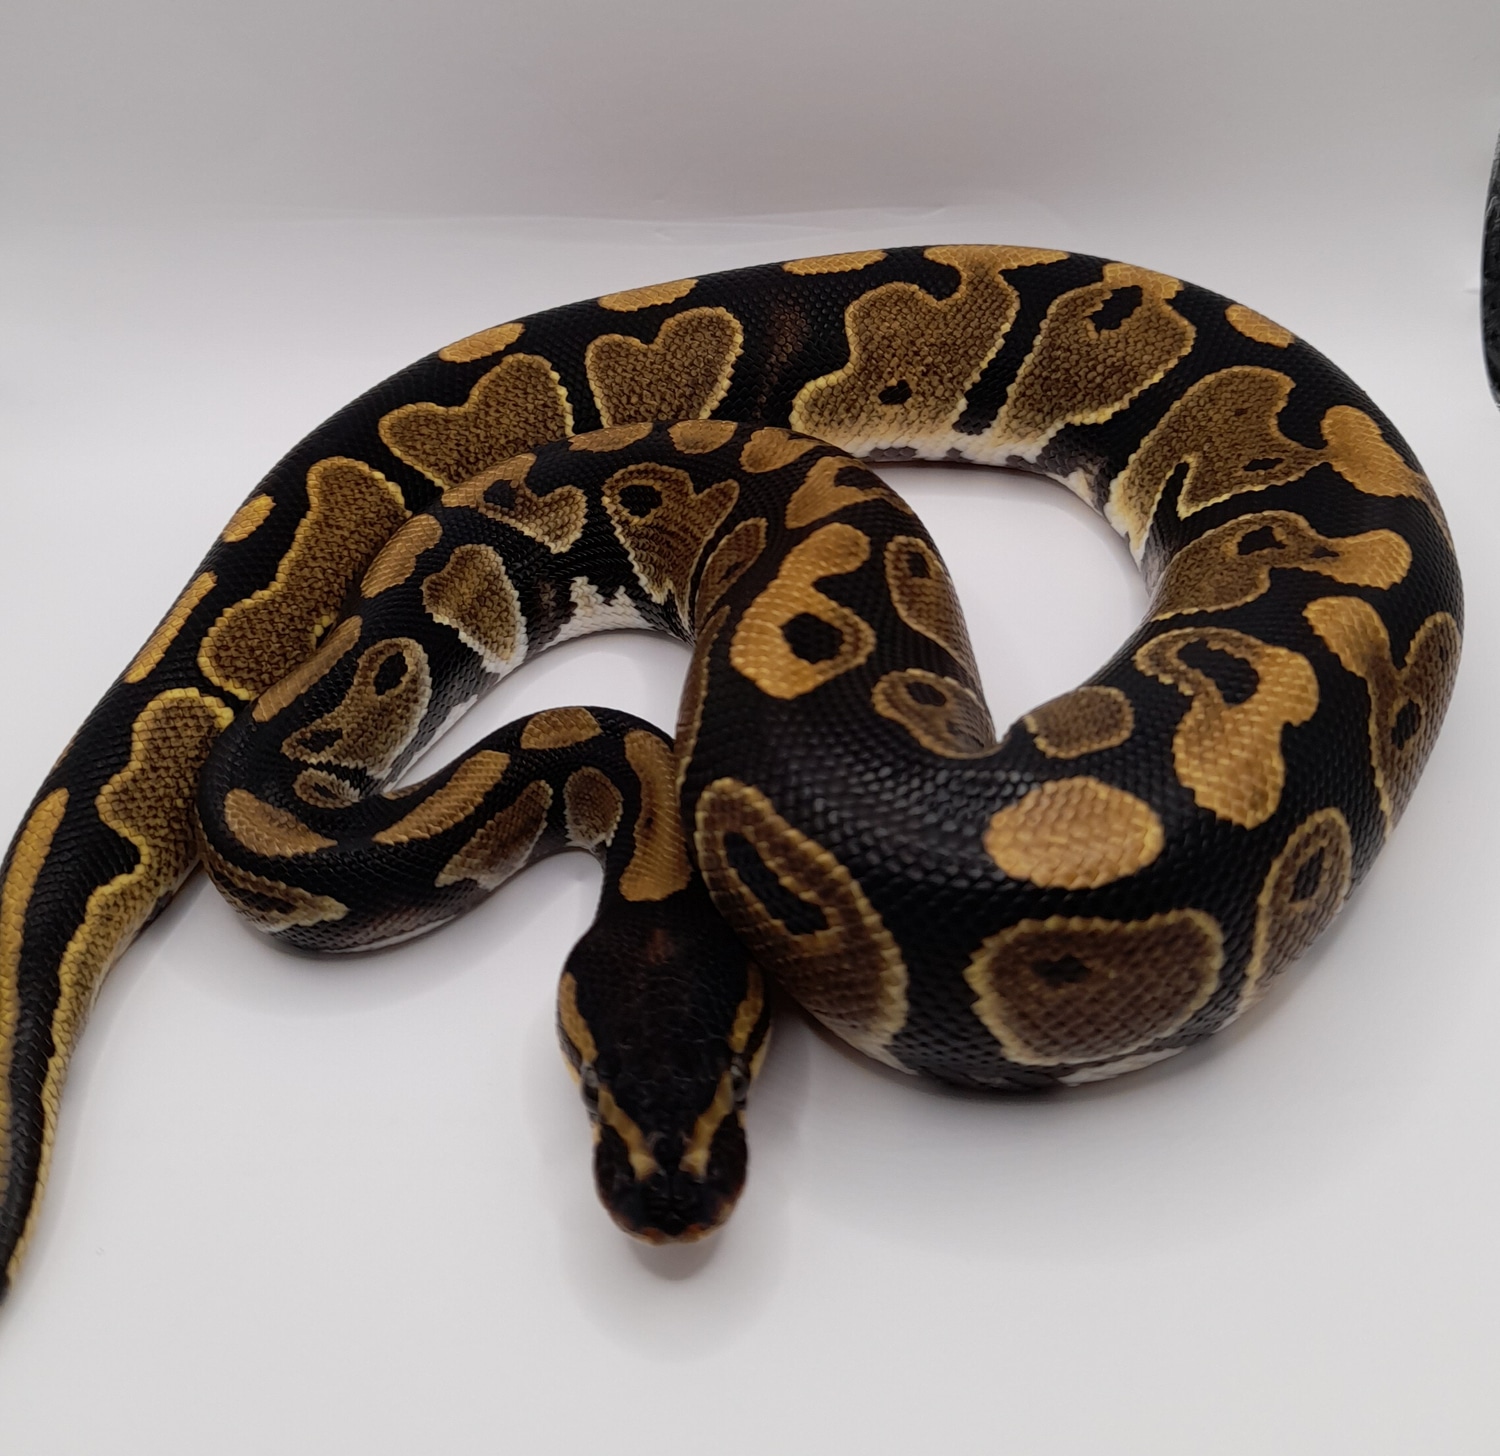 Dinker (KMG) Pos Het Pied - 20% Off (BLACK FRIDAY OFFER) Ball Python by Knights Royal Pythons